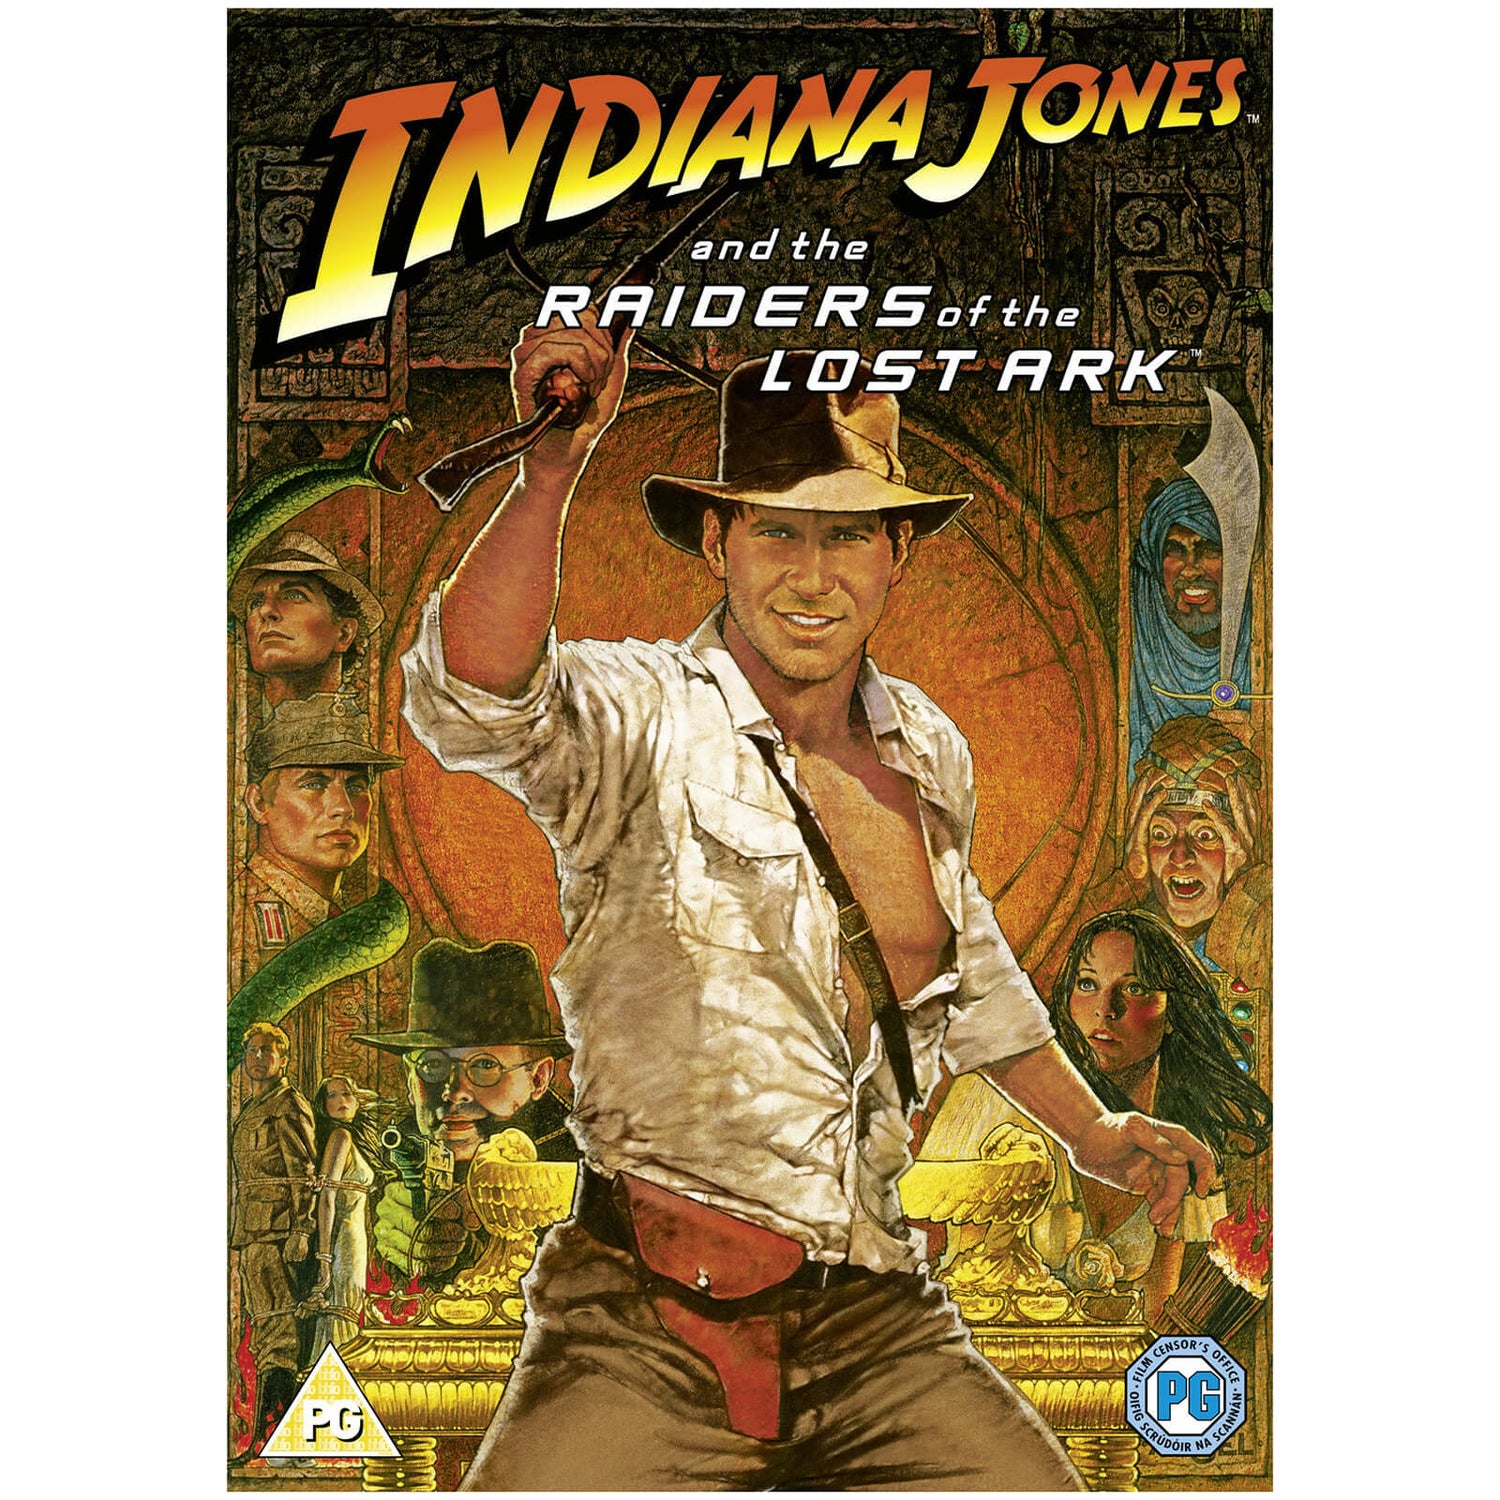 Raiders Of The Lost Ark [Special Edition]